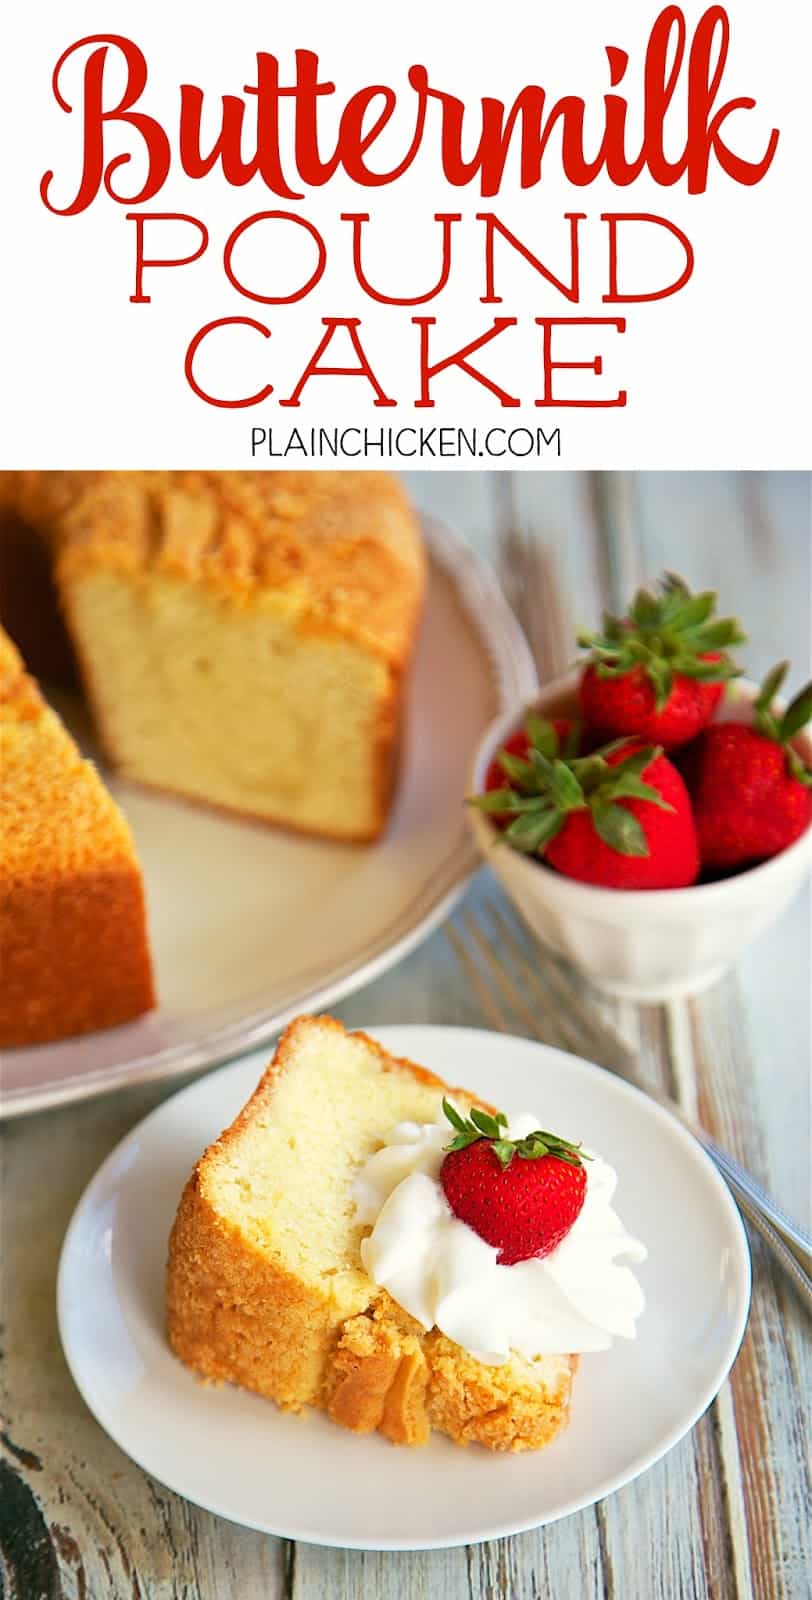 Buttermilk Pound Cake - THE BEST! There are never any leftovers when I take this to a potluck. Sugar, shortening, eggs, buttermilk, baking soda, flour and vanilla, butter and nut flavoring. Makes a great gift! Freezes well too!!